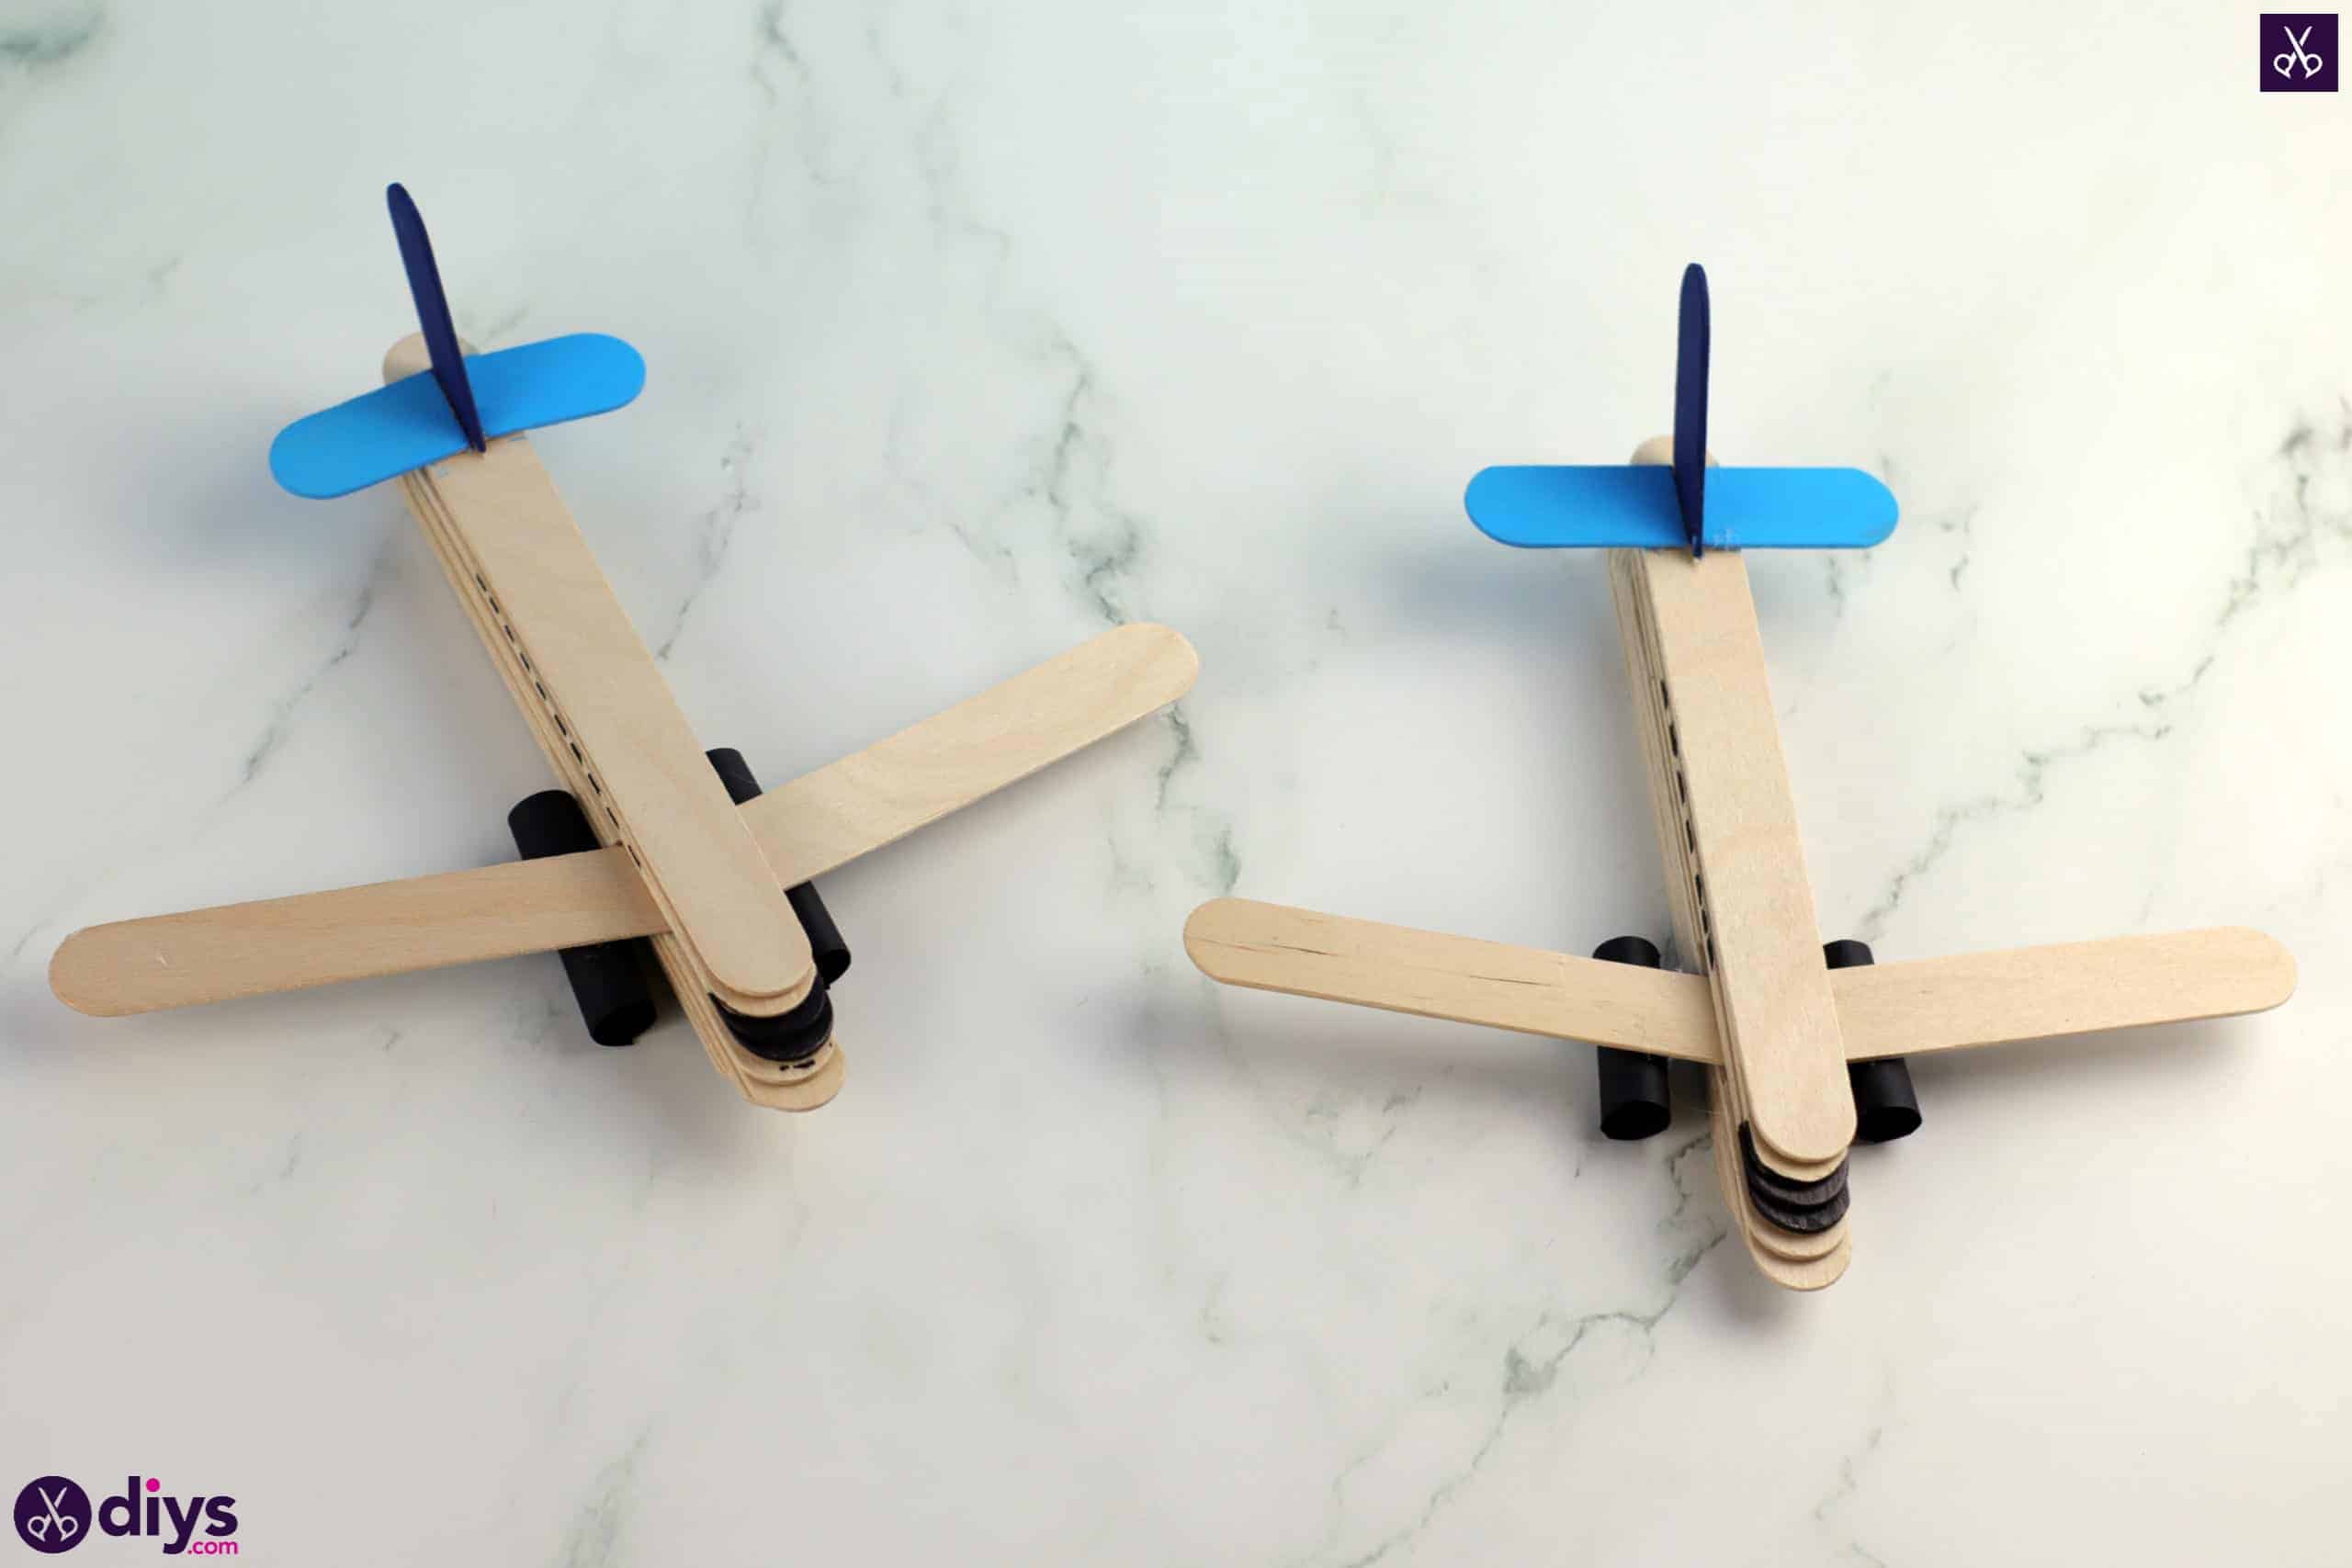 Popsicle stick airplane diy for kid